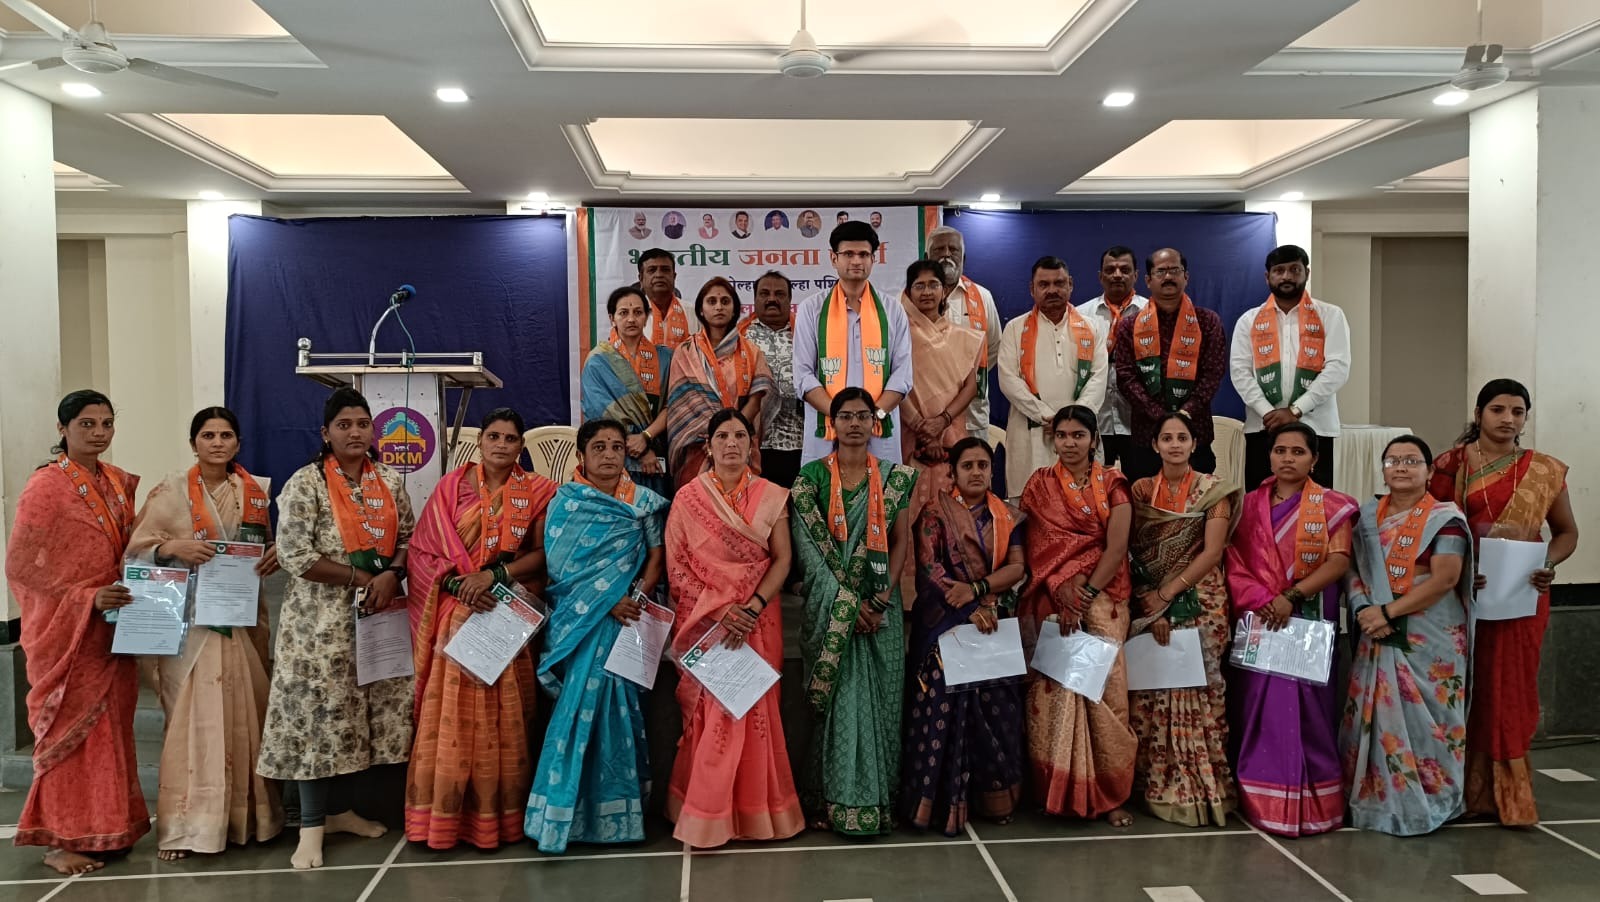 The new executive committee of BJP in Kagal taluka has been announced